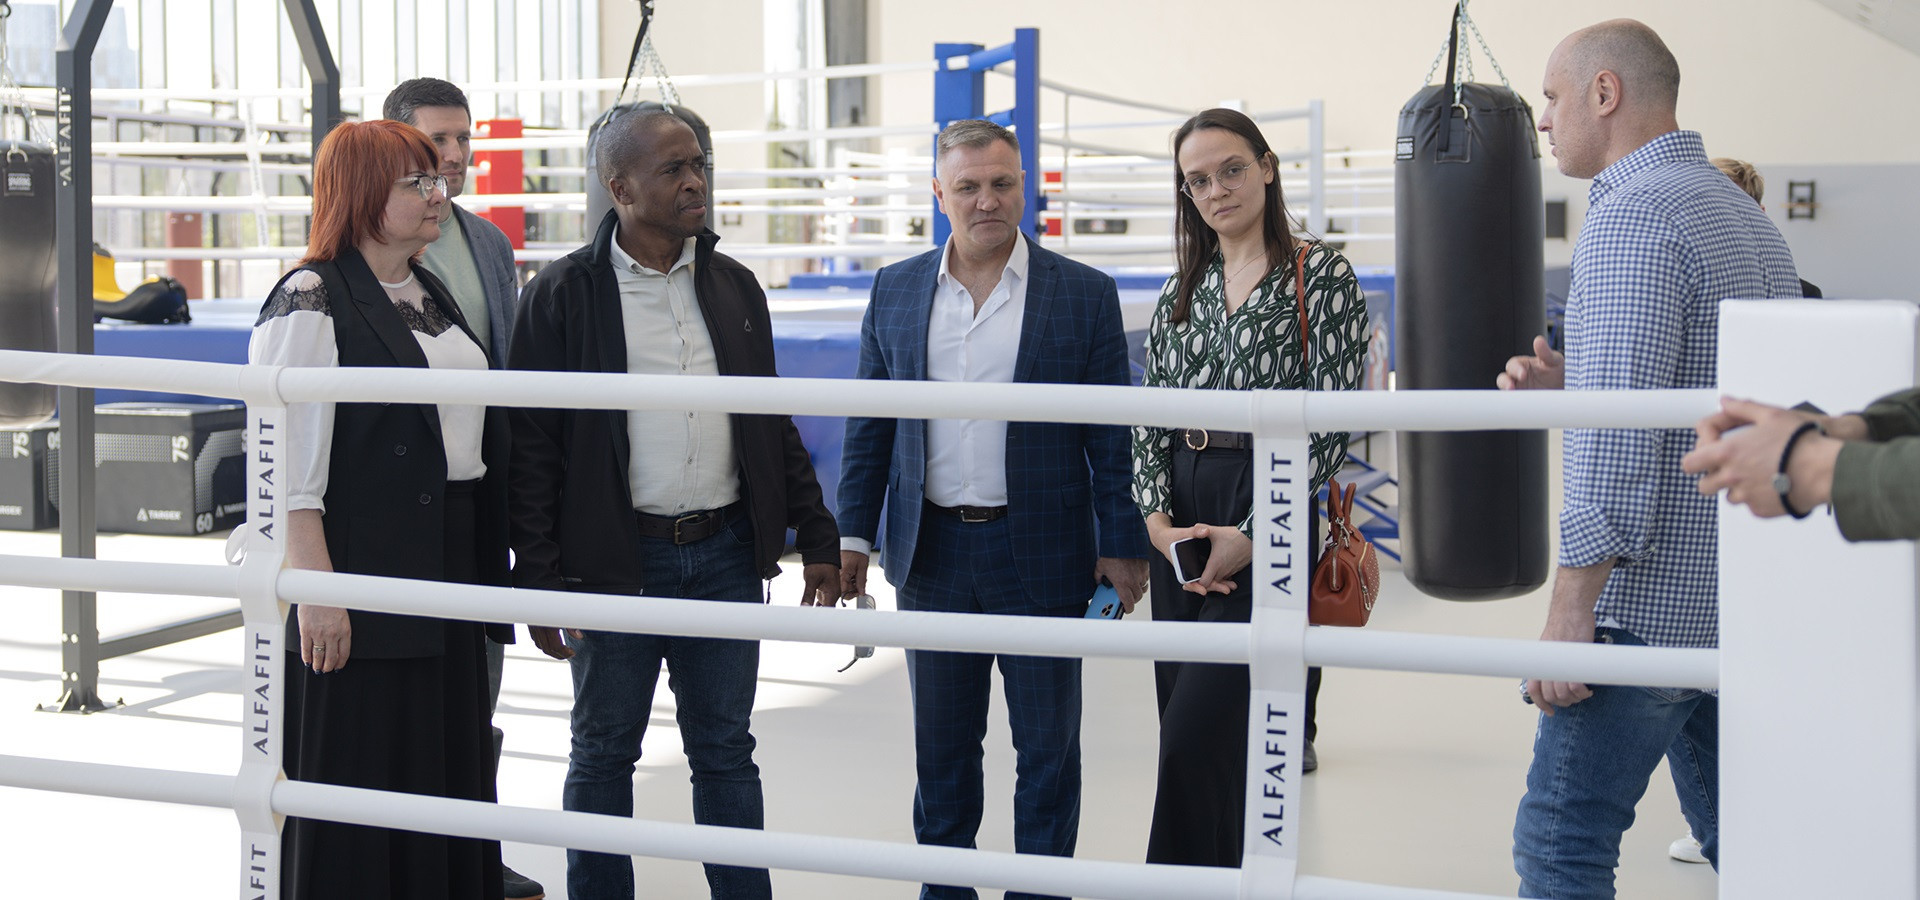 SANABO President Siyabulelo Mkvale, second from left, was given a tour of the International Boxing Center in Luzknik ©RBF